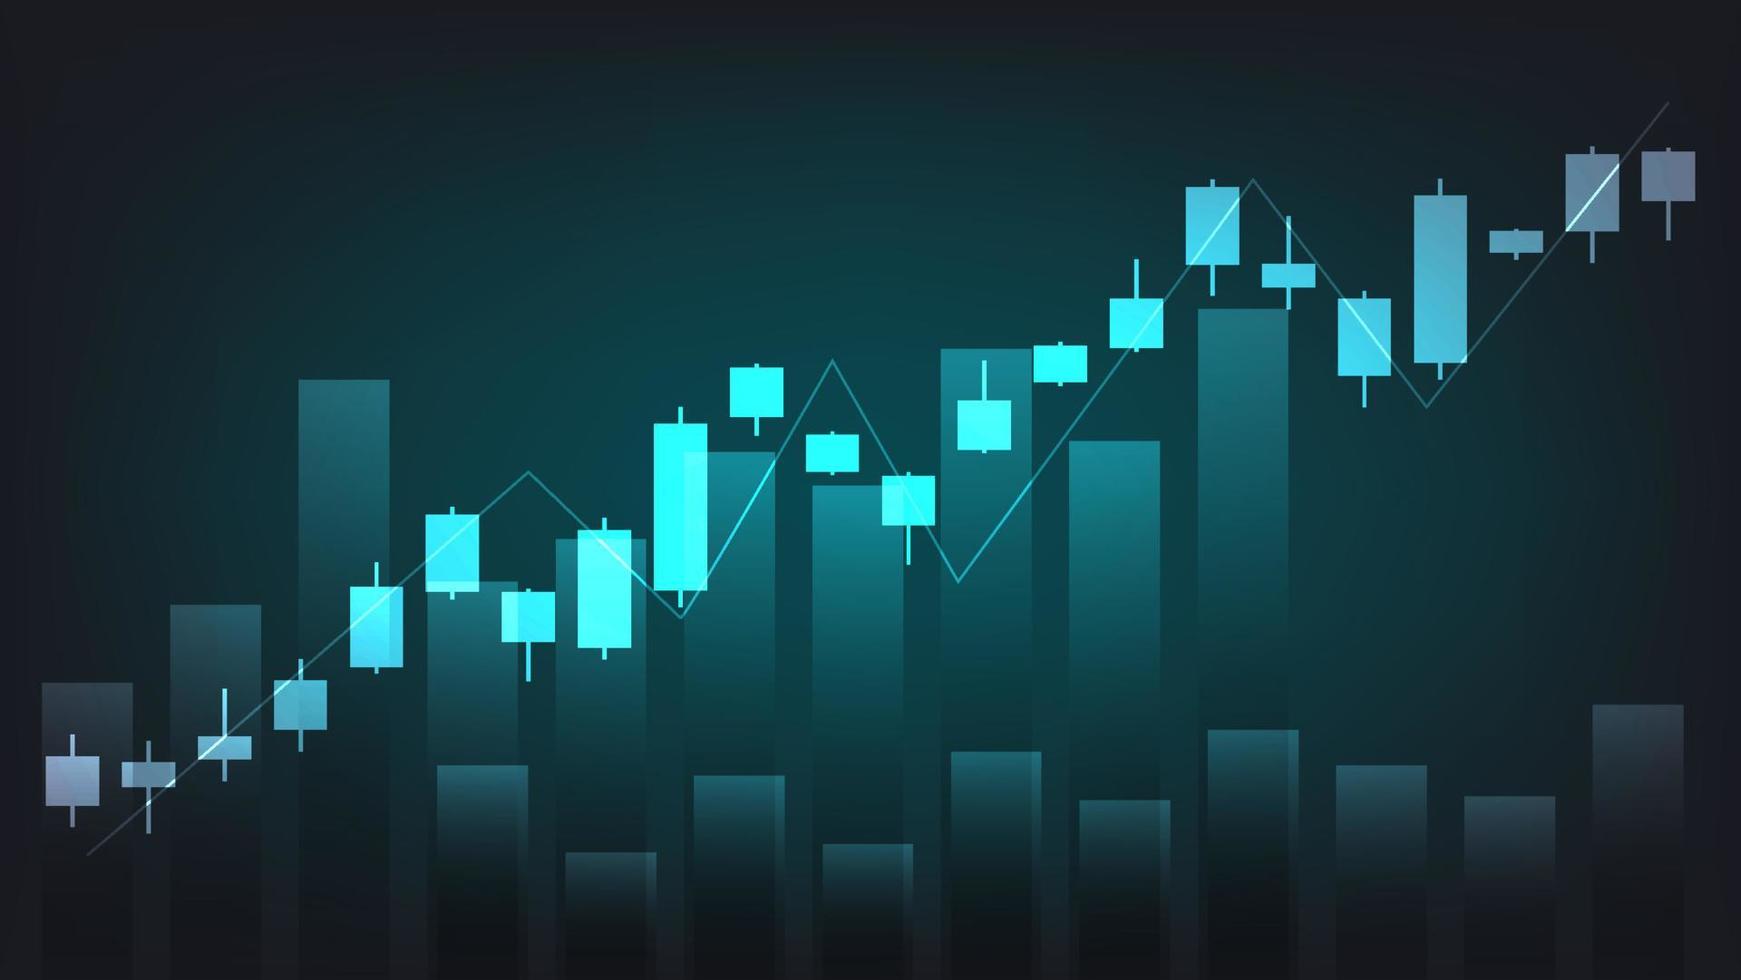 Financial business statistics with bar graph and candlestick chart show stock market price on dark green background vector